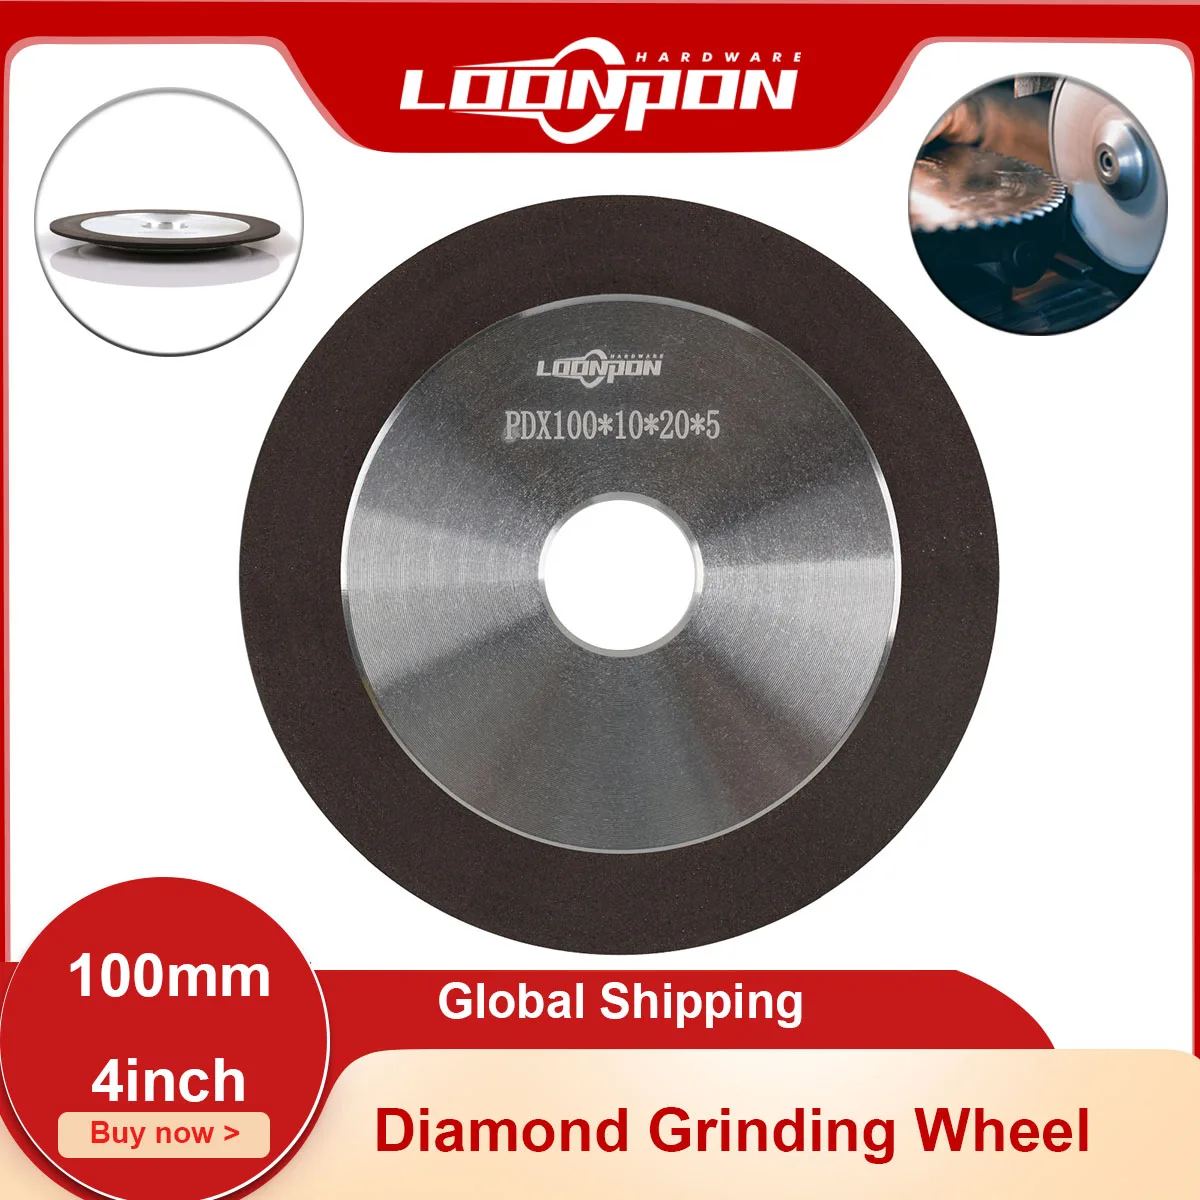 100mm/4inch Diamond Grinding Wheel Grinding Circle Grit 150 for Tungsten Steel Milling Cutter Tool Sharpener Grinder tungsten electrode sharpener tungsten needles tungsten rods grinder aluminum tig welding tungsten electrodes sharpen tool